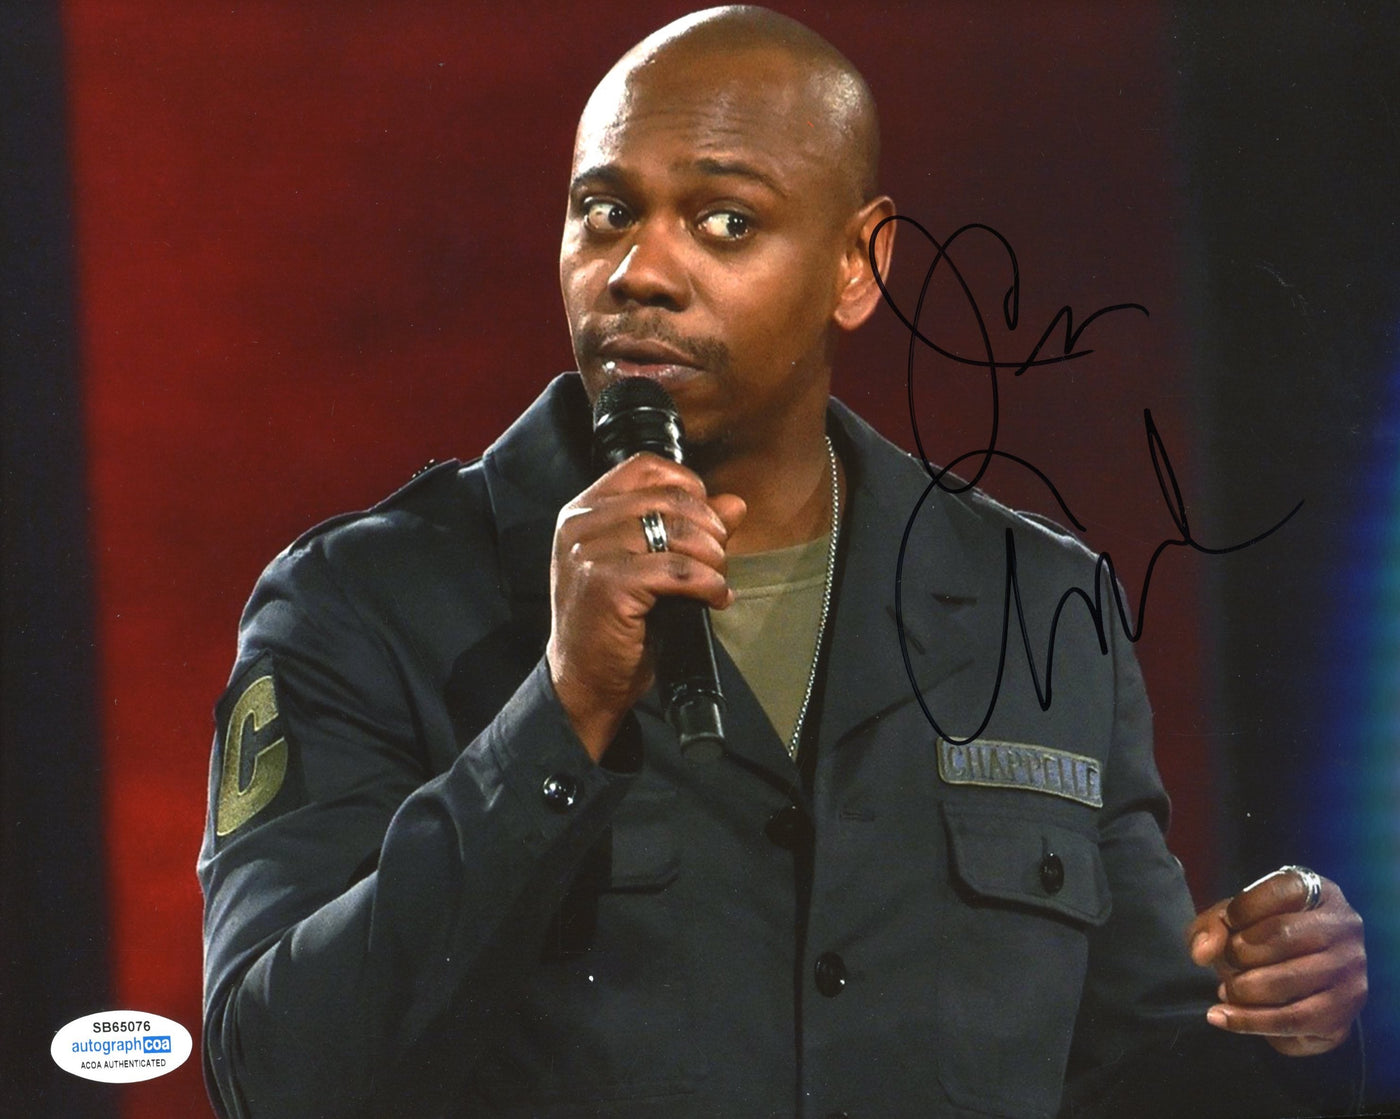 DAVE CHAPPELLE SIGNED 8X10 PHOTO COMEDIAN Autographed ACOA